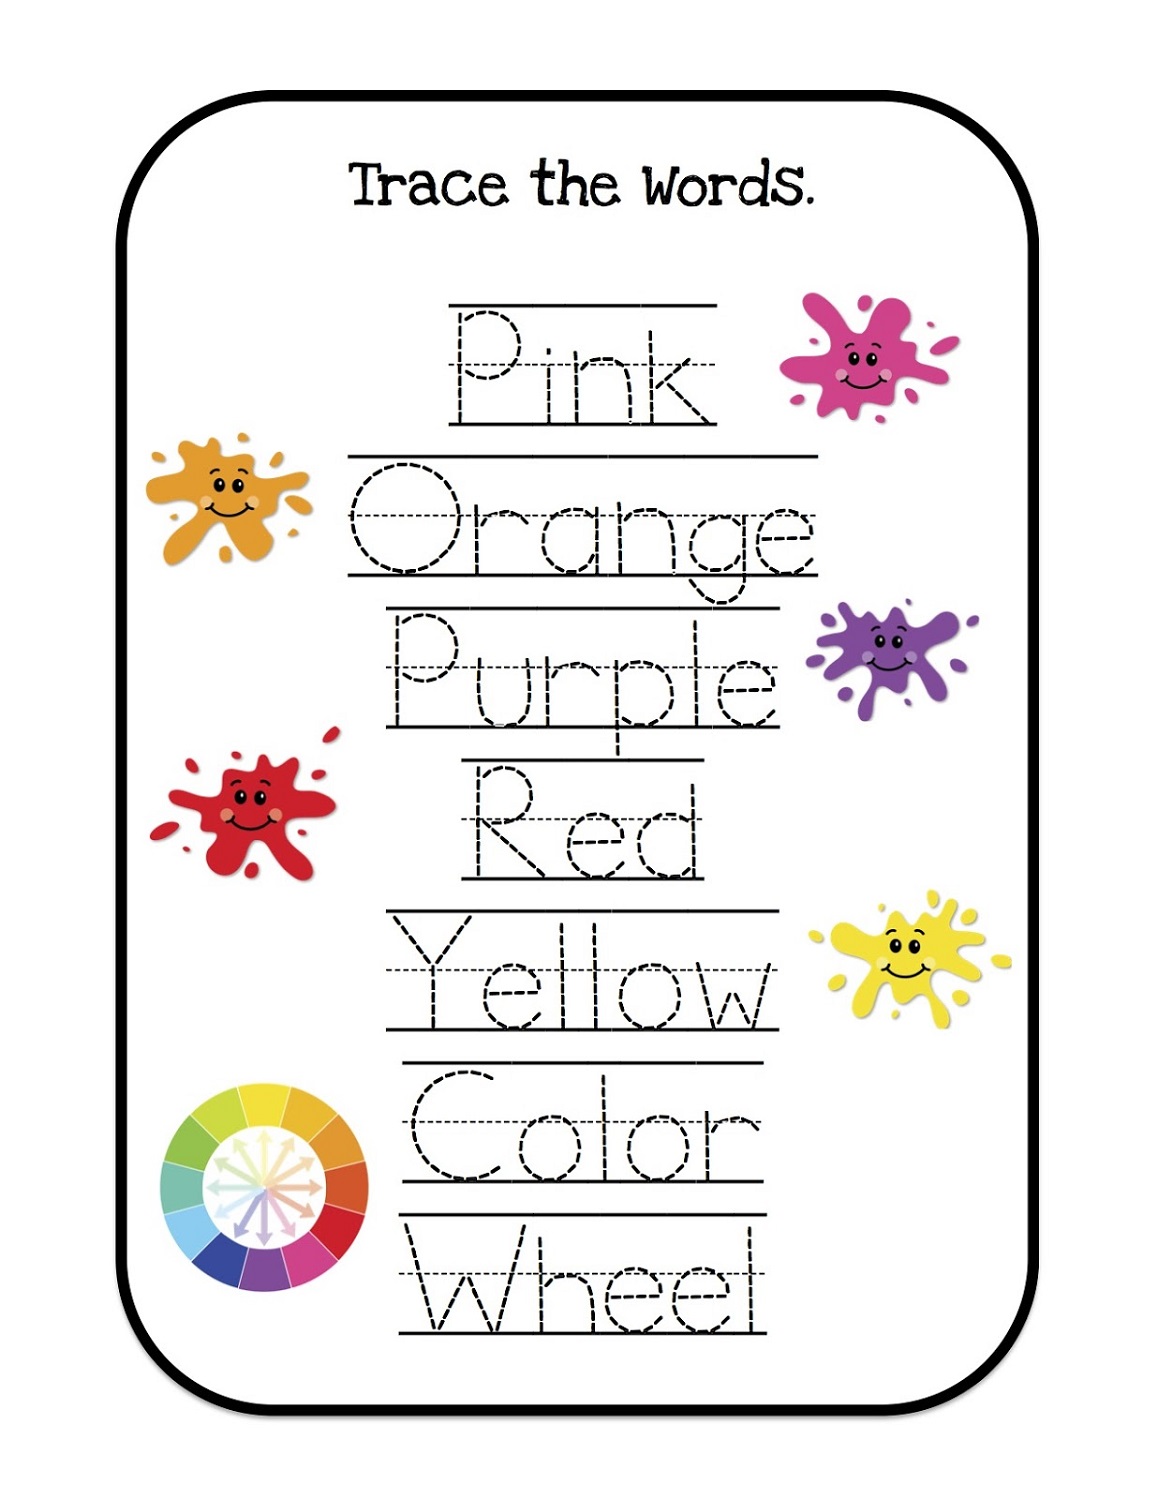 Free Preschool Worksheets to Print | Activity Shelter